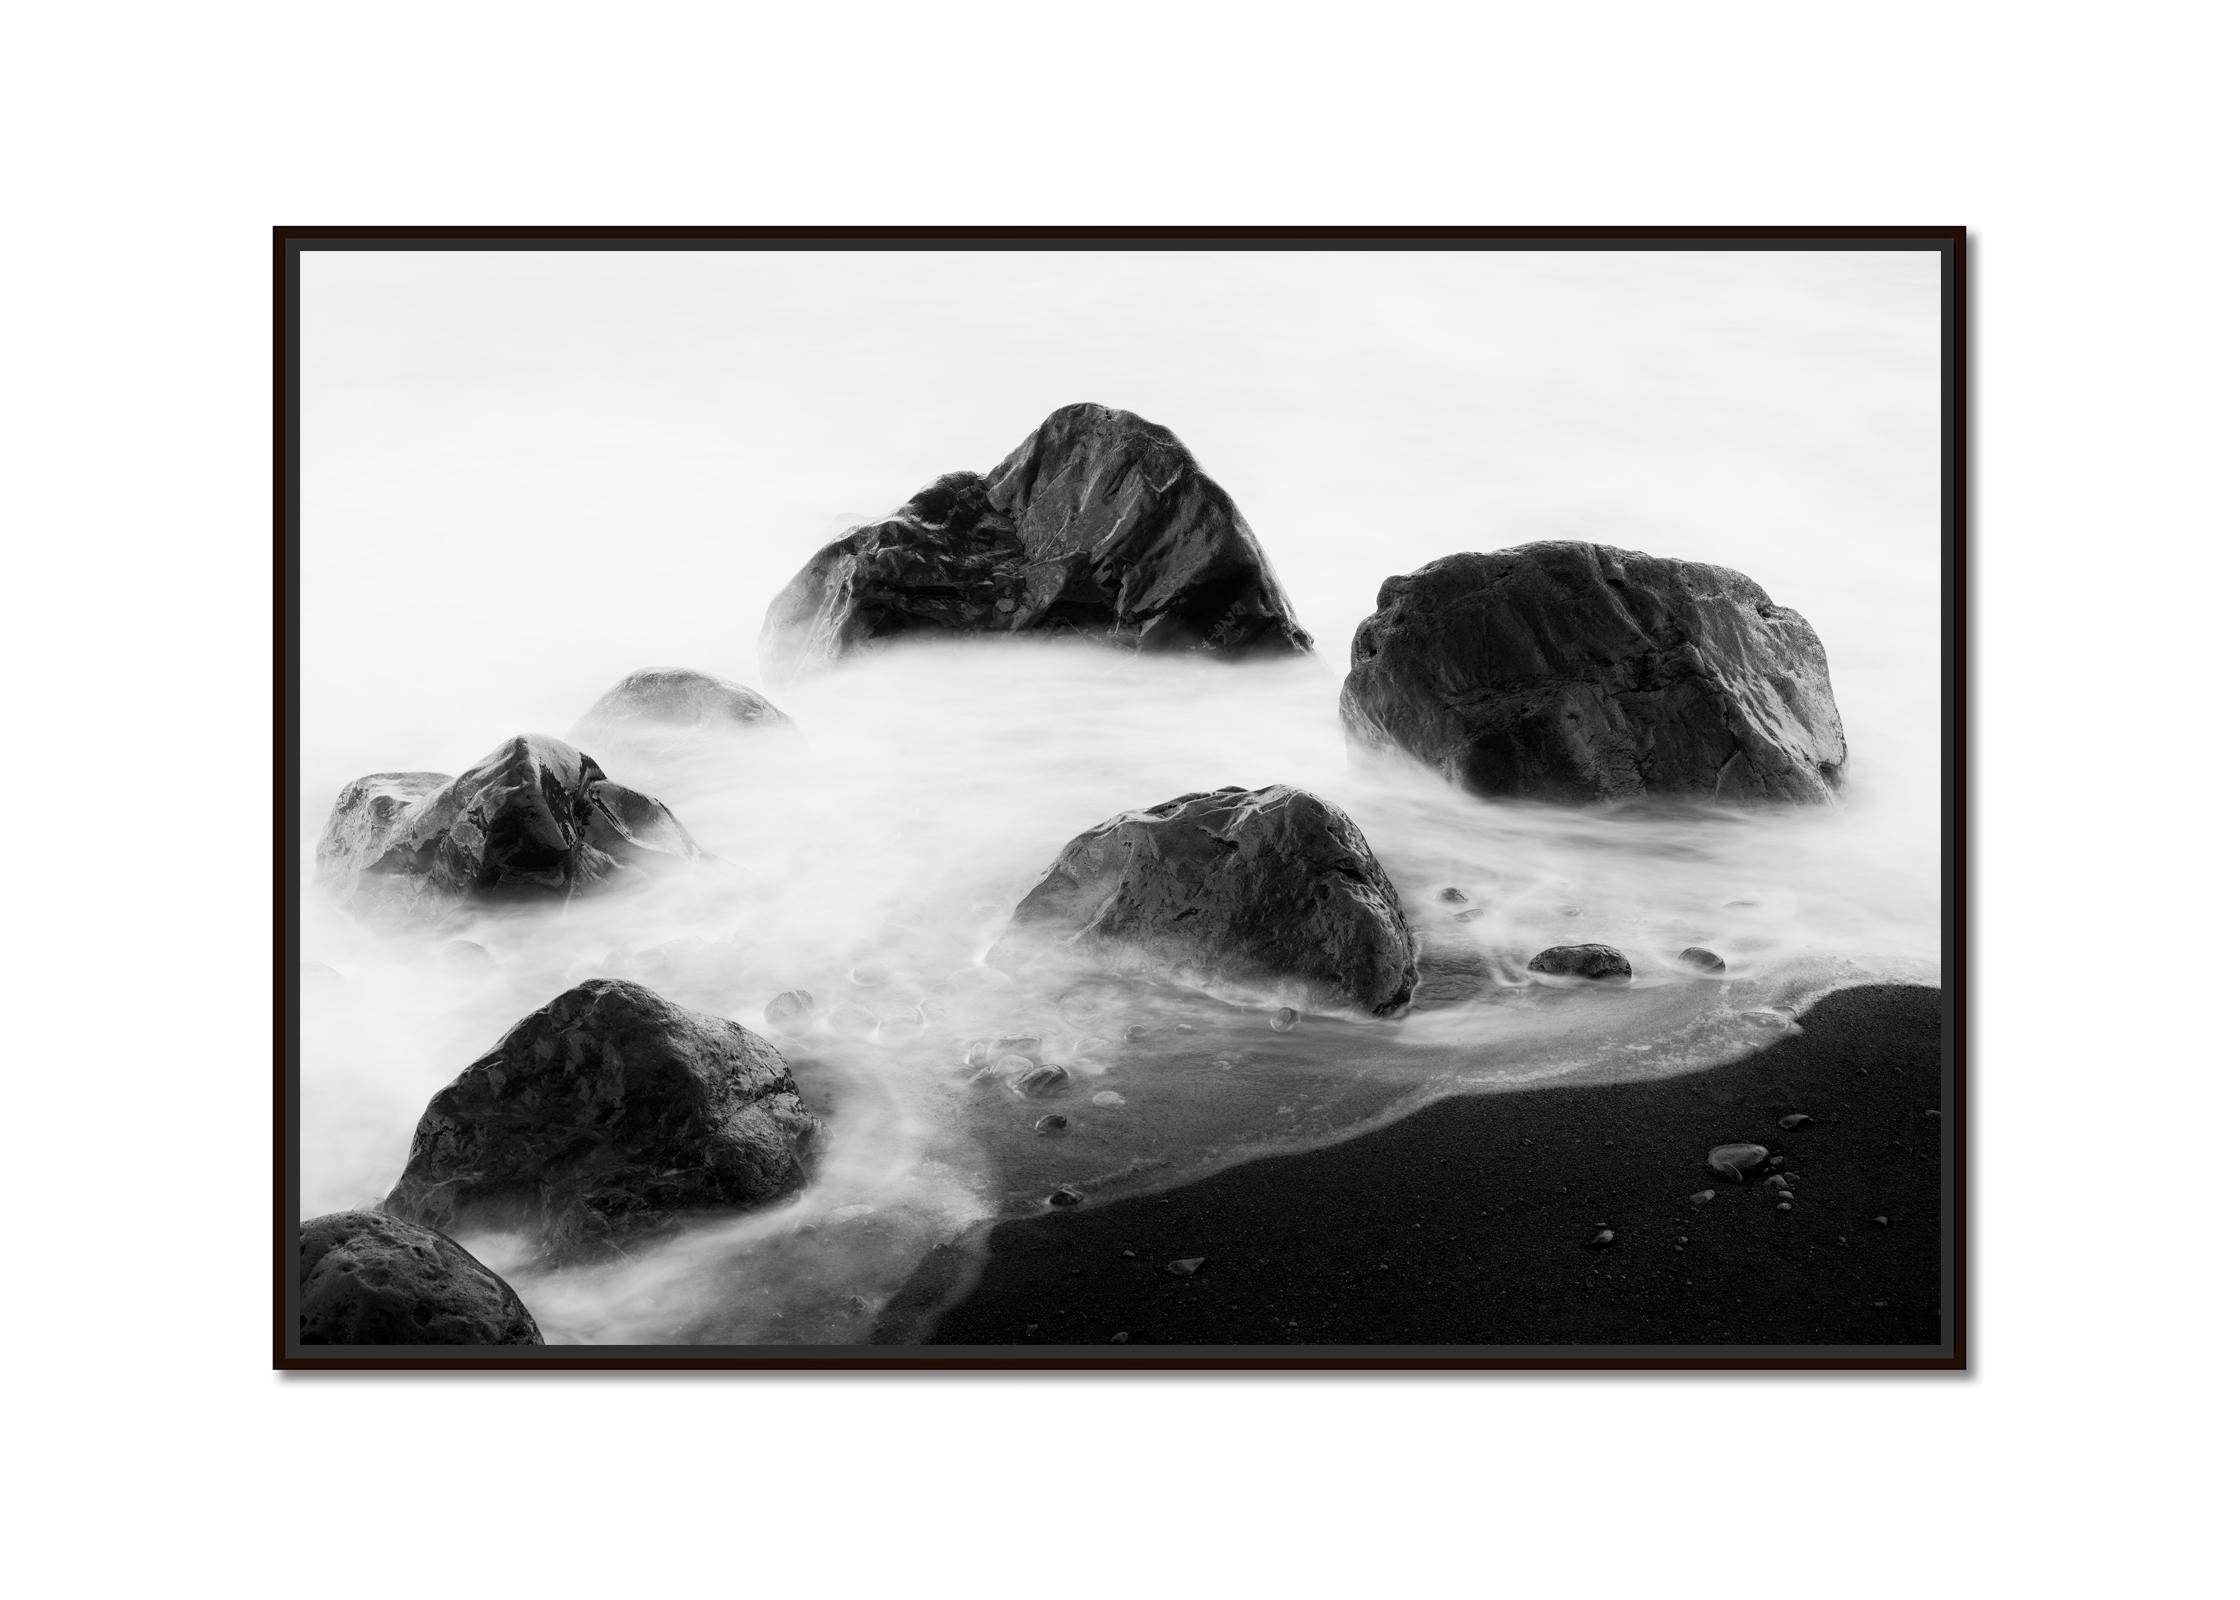 Black Rocks and a few Stones Spain black white fine art landscape photography - Photograph by Gerald Berghammer